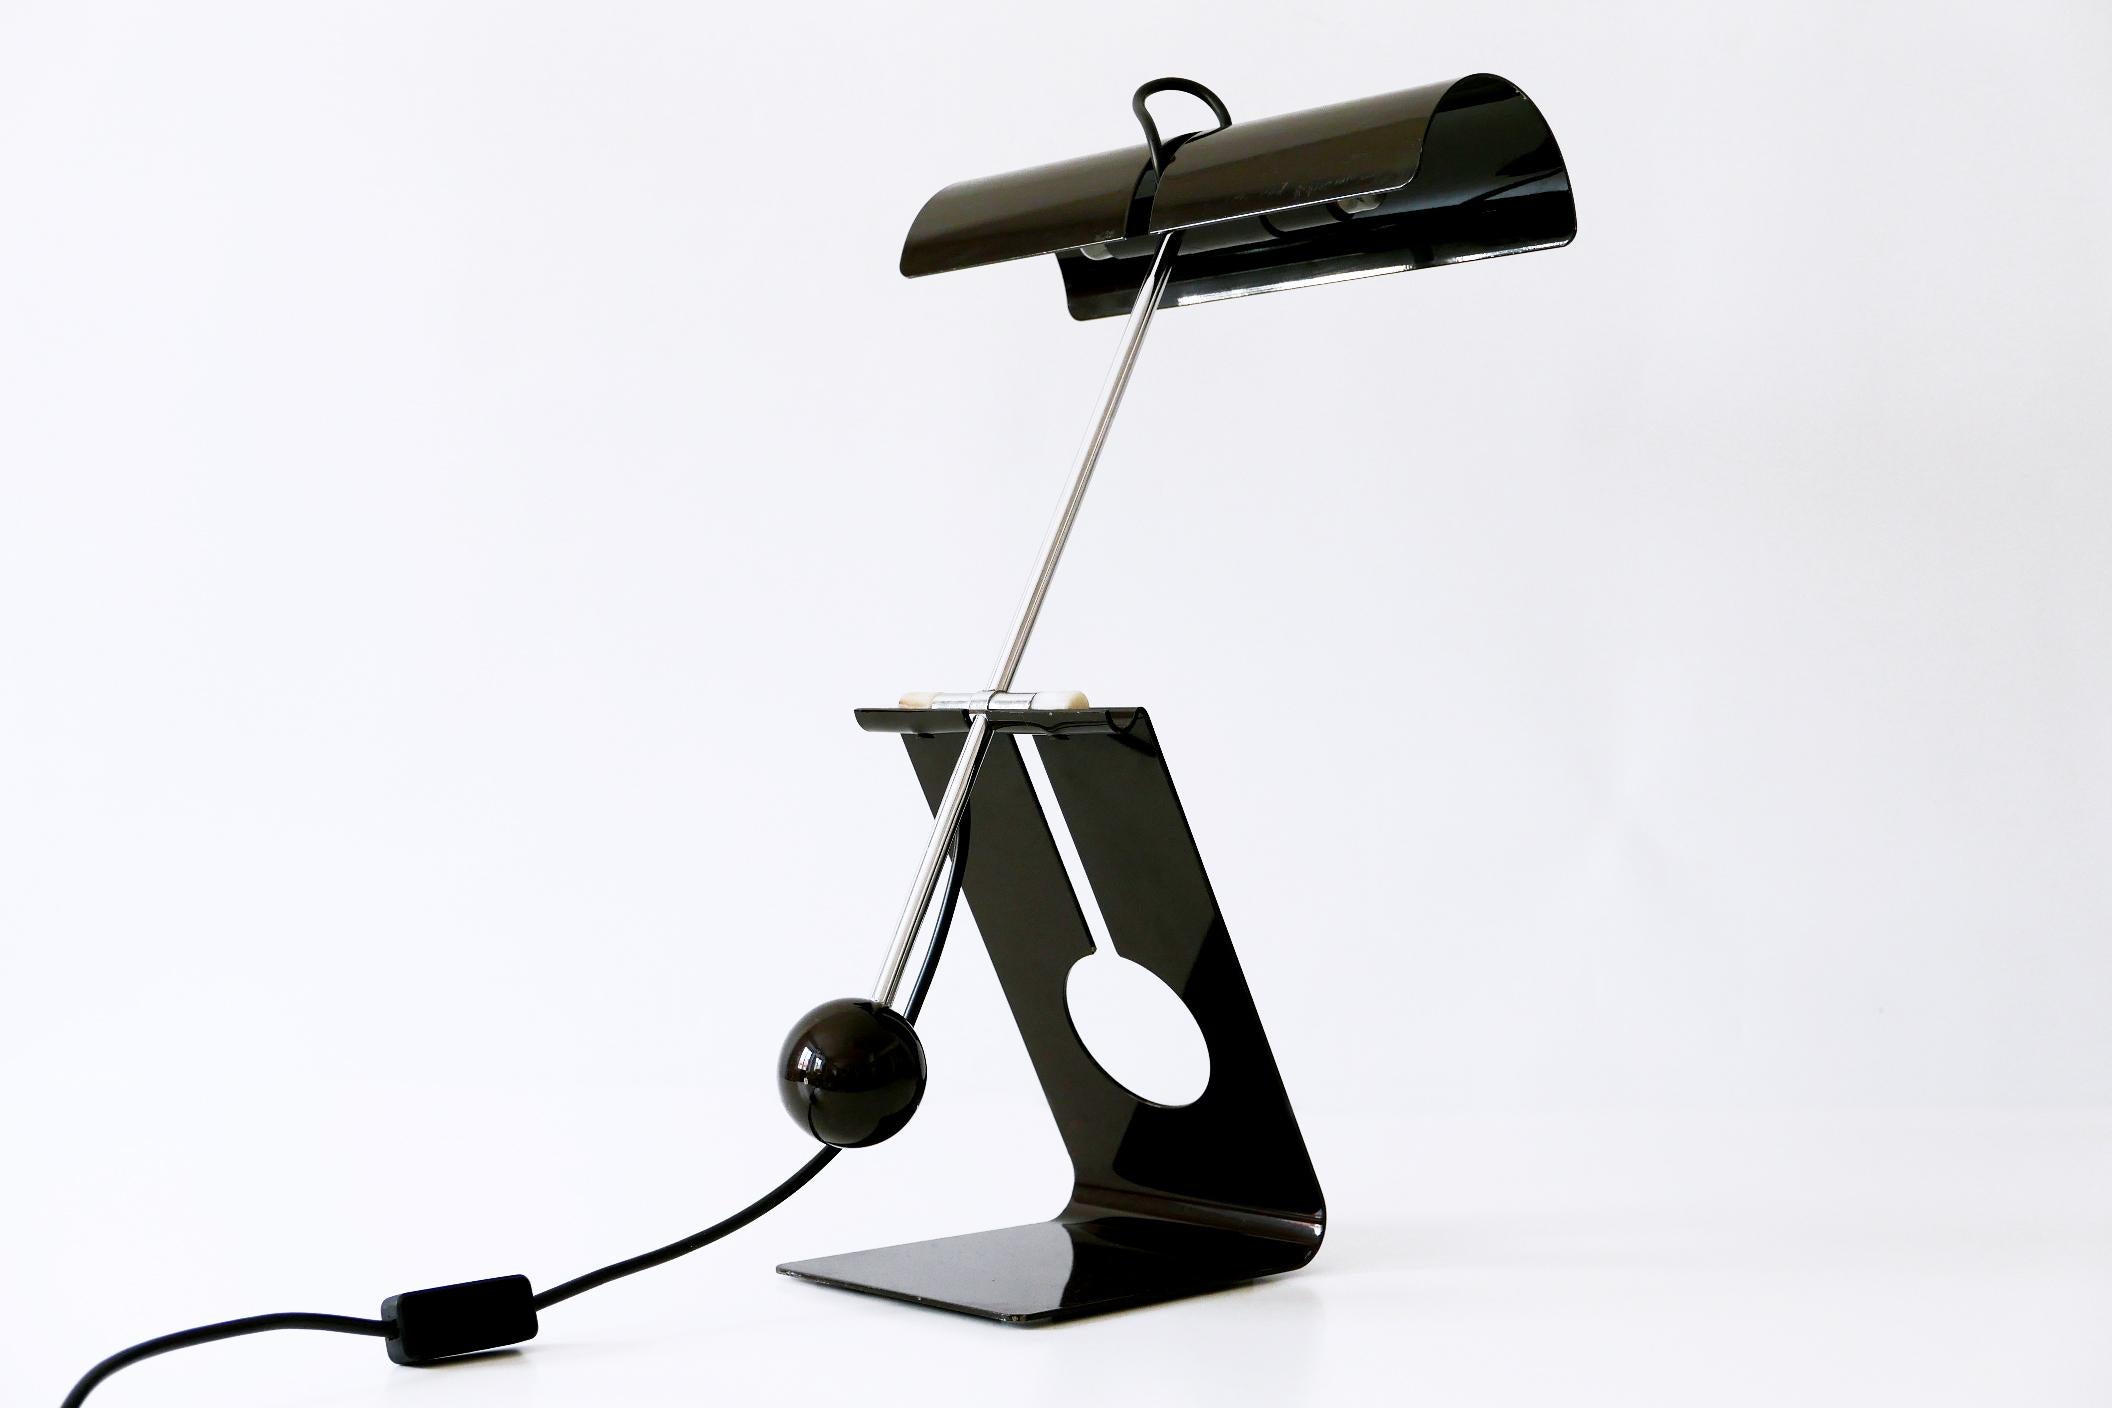 Articulated Table Lamp Picchio by Mauro Martini for Fratelli Martini 1970s Italy For Sale 5